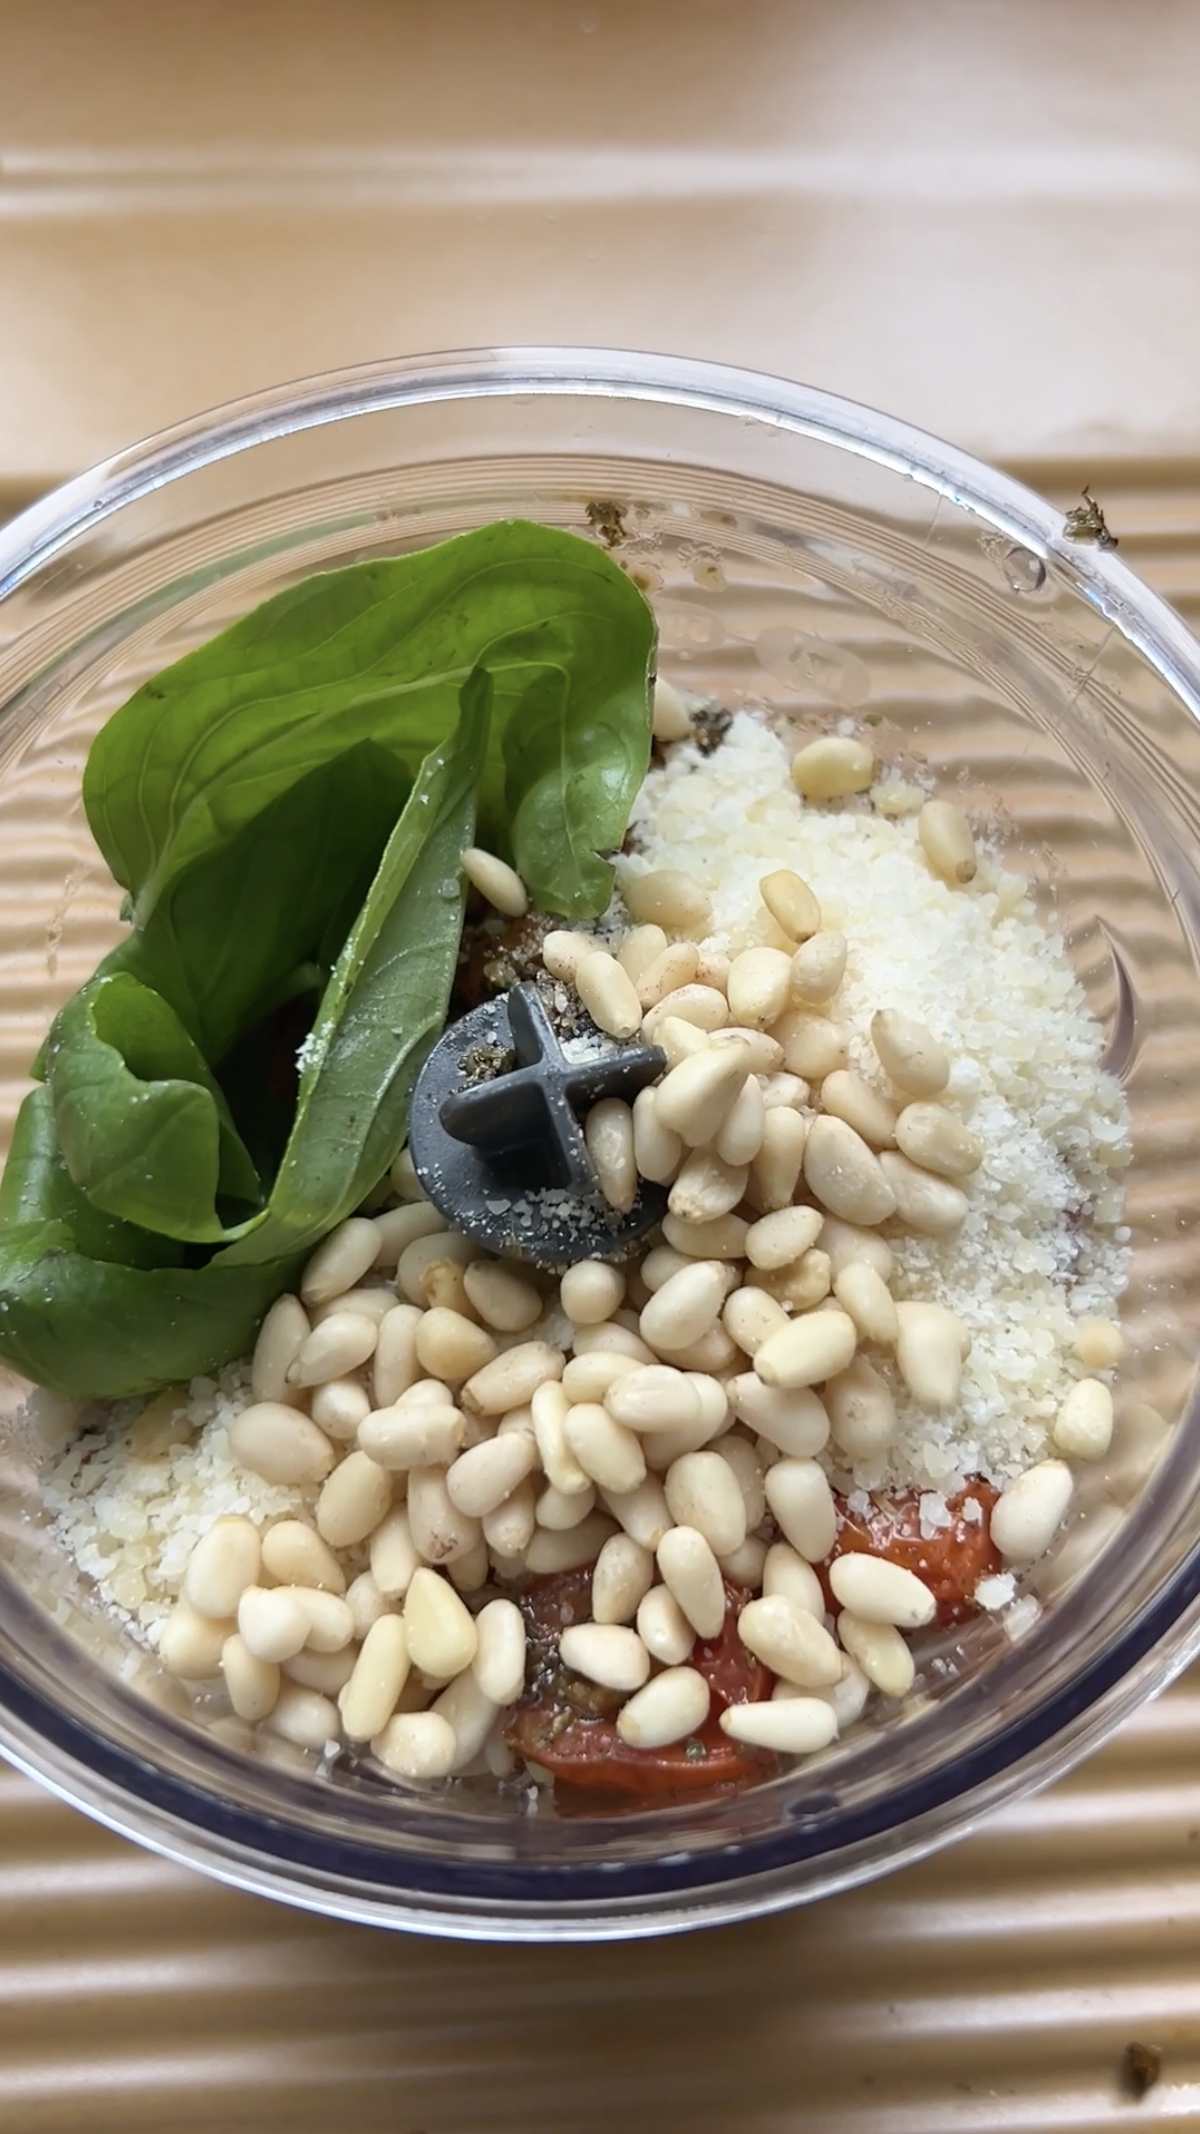 Pine nuts, basil, Parmesan, garlic and cherry tomatoes in a blender.